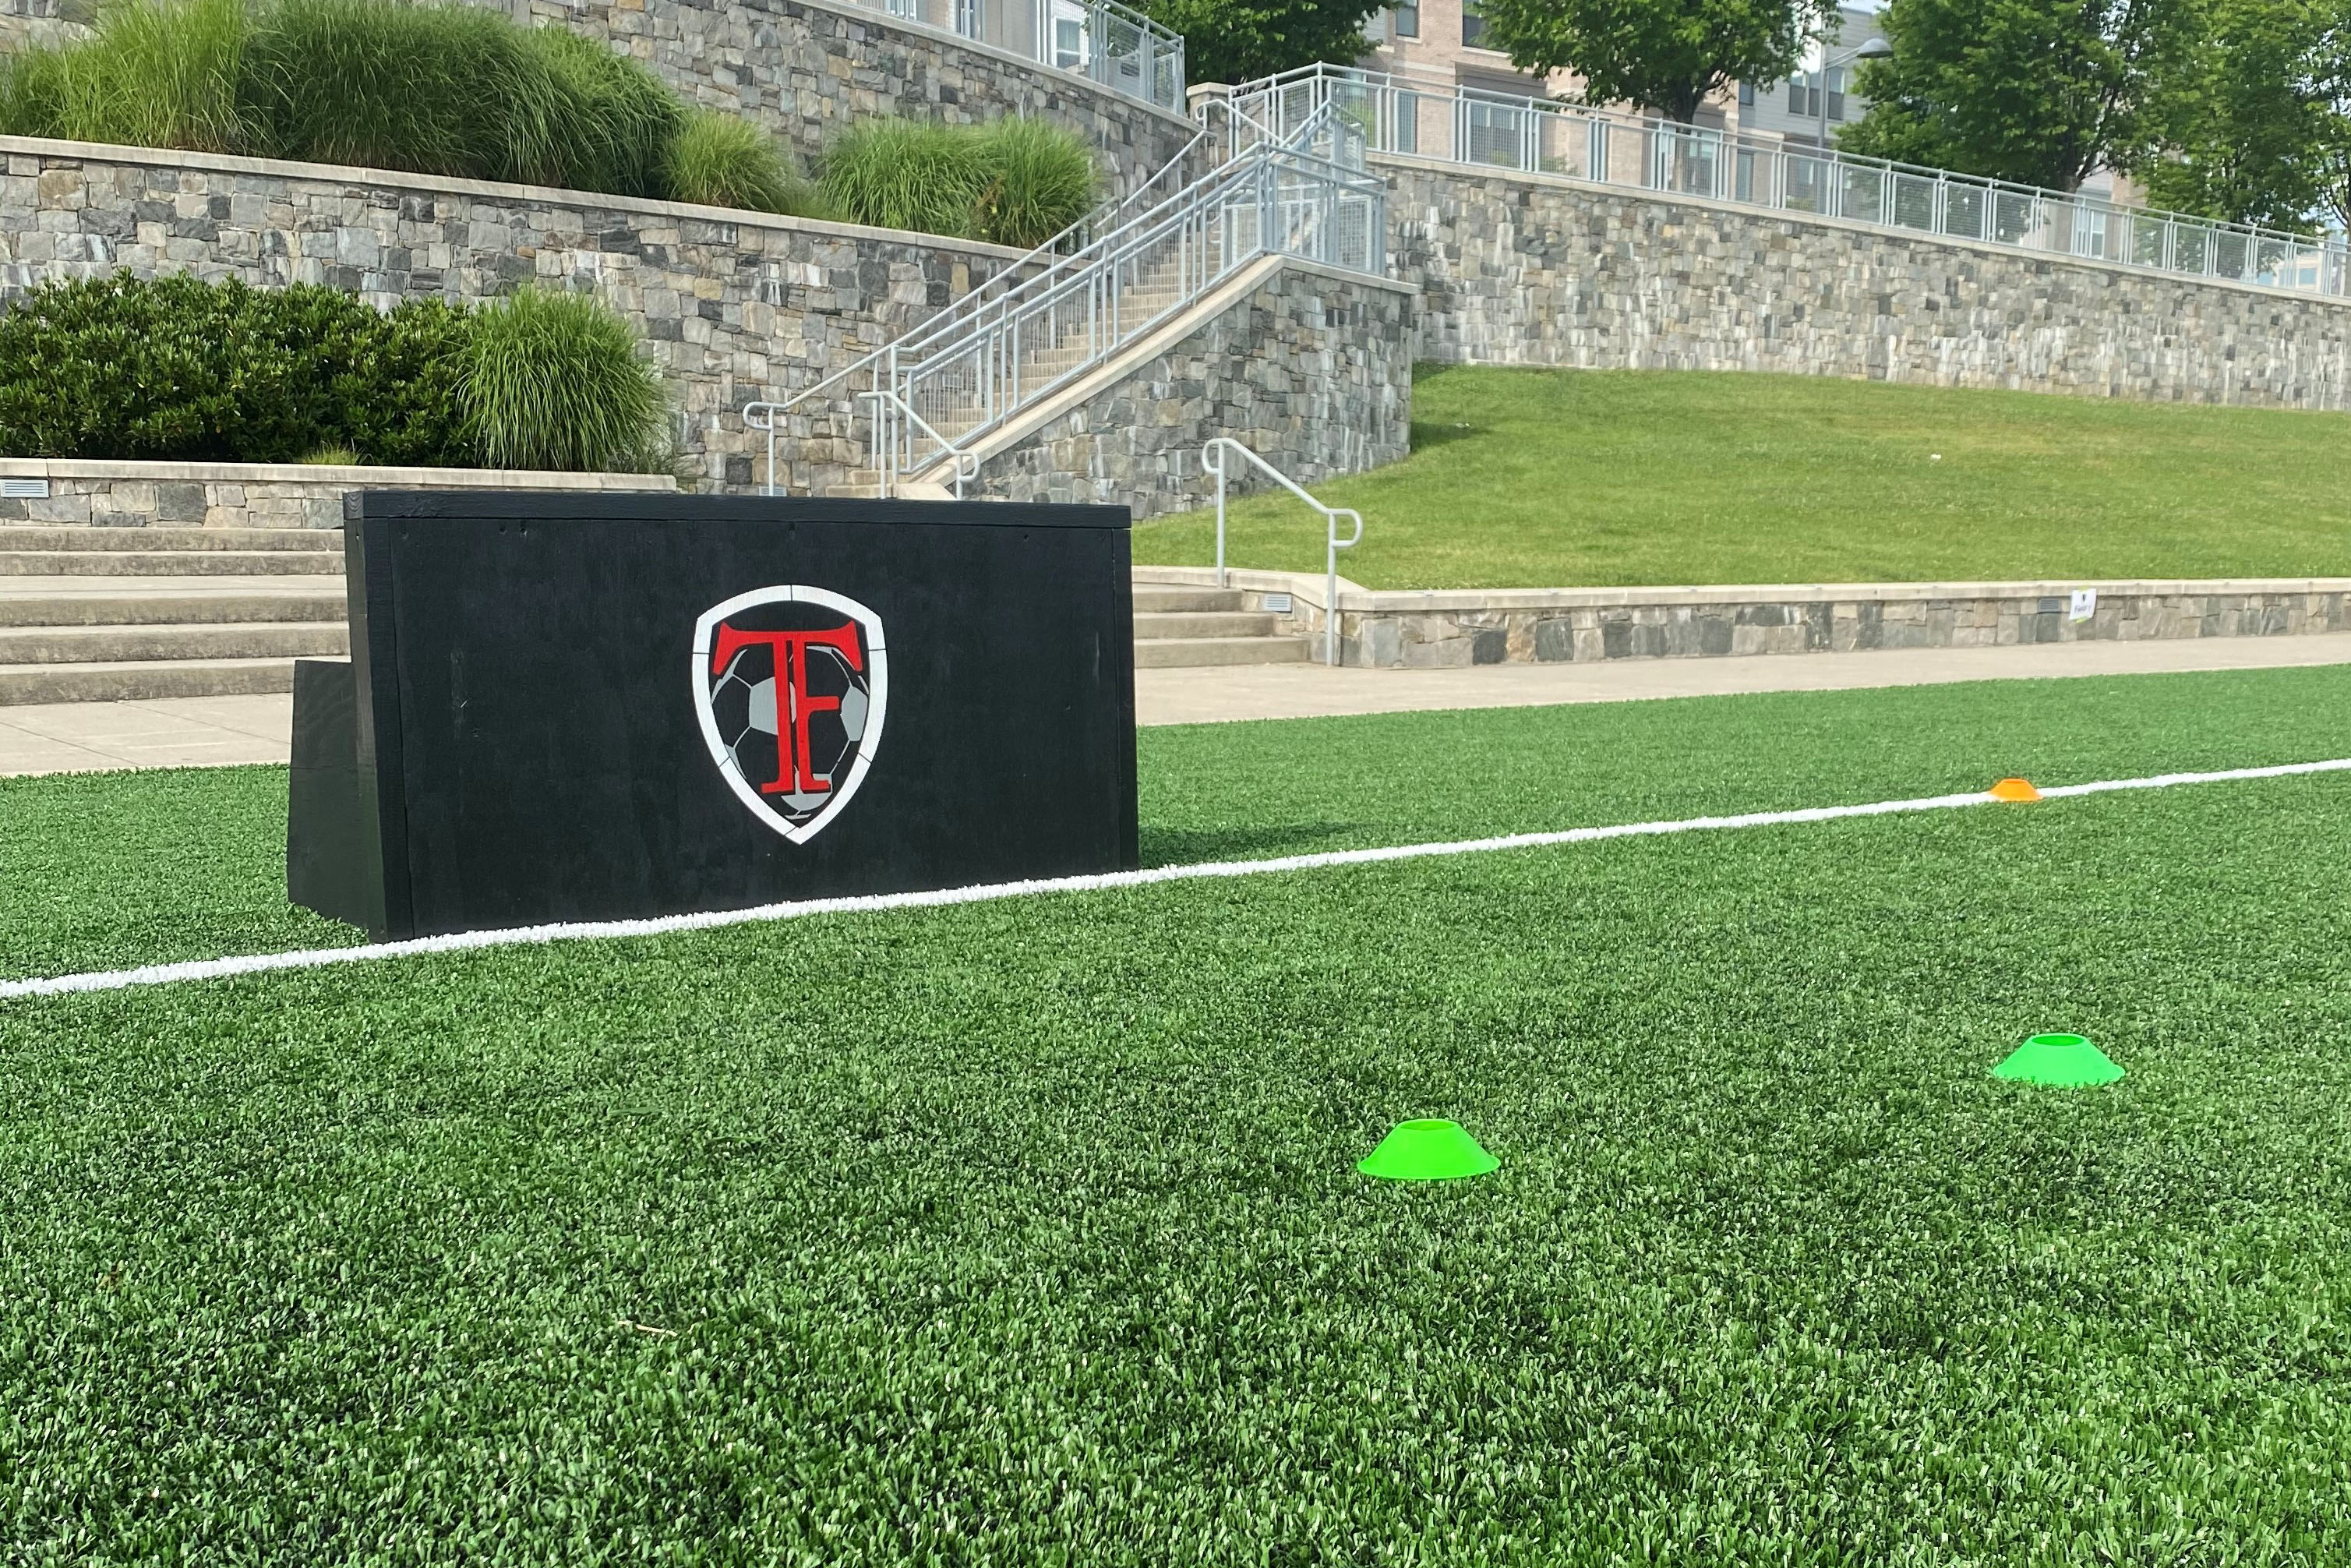 Get your TF Kick Wall from CB Soccer!